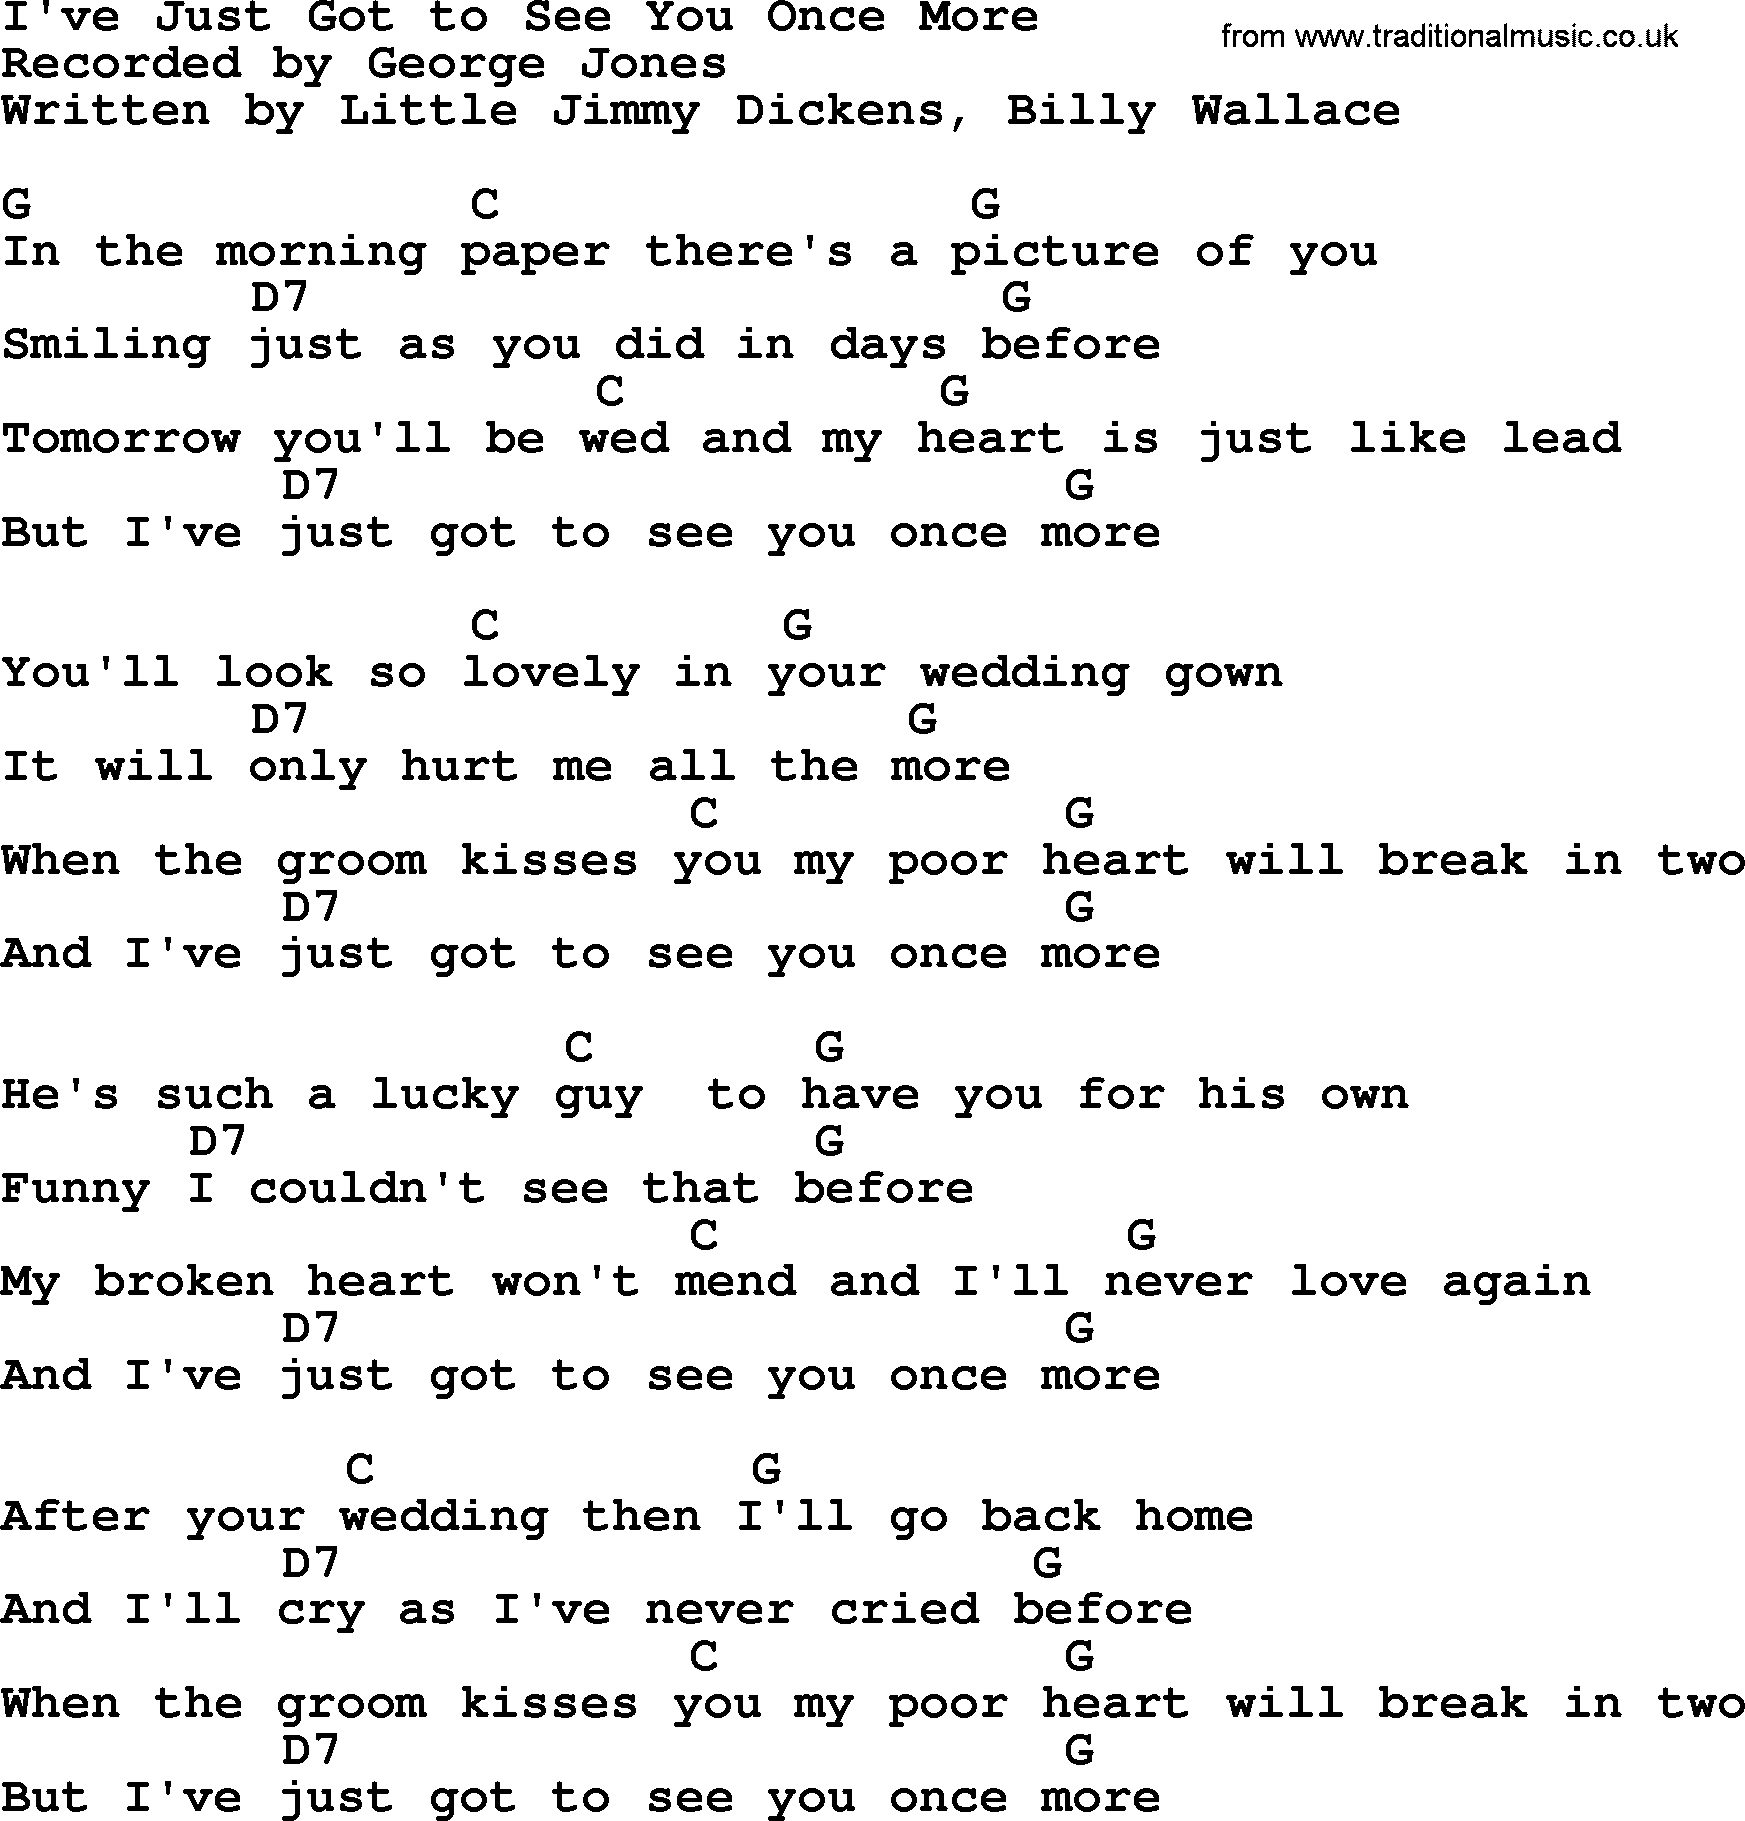 George Jones song: I've Just Got To See You Once More, lyrics and chords